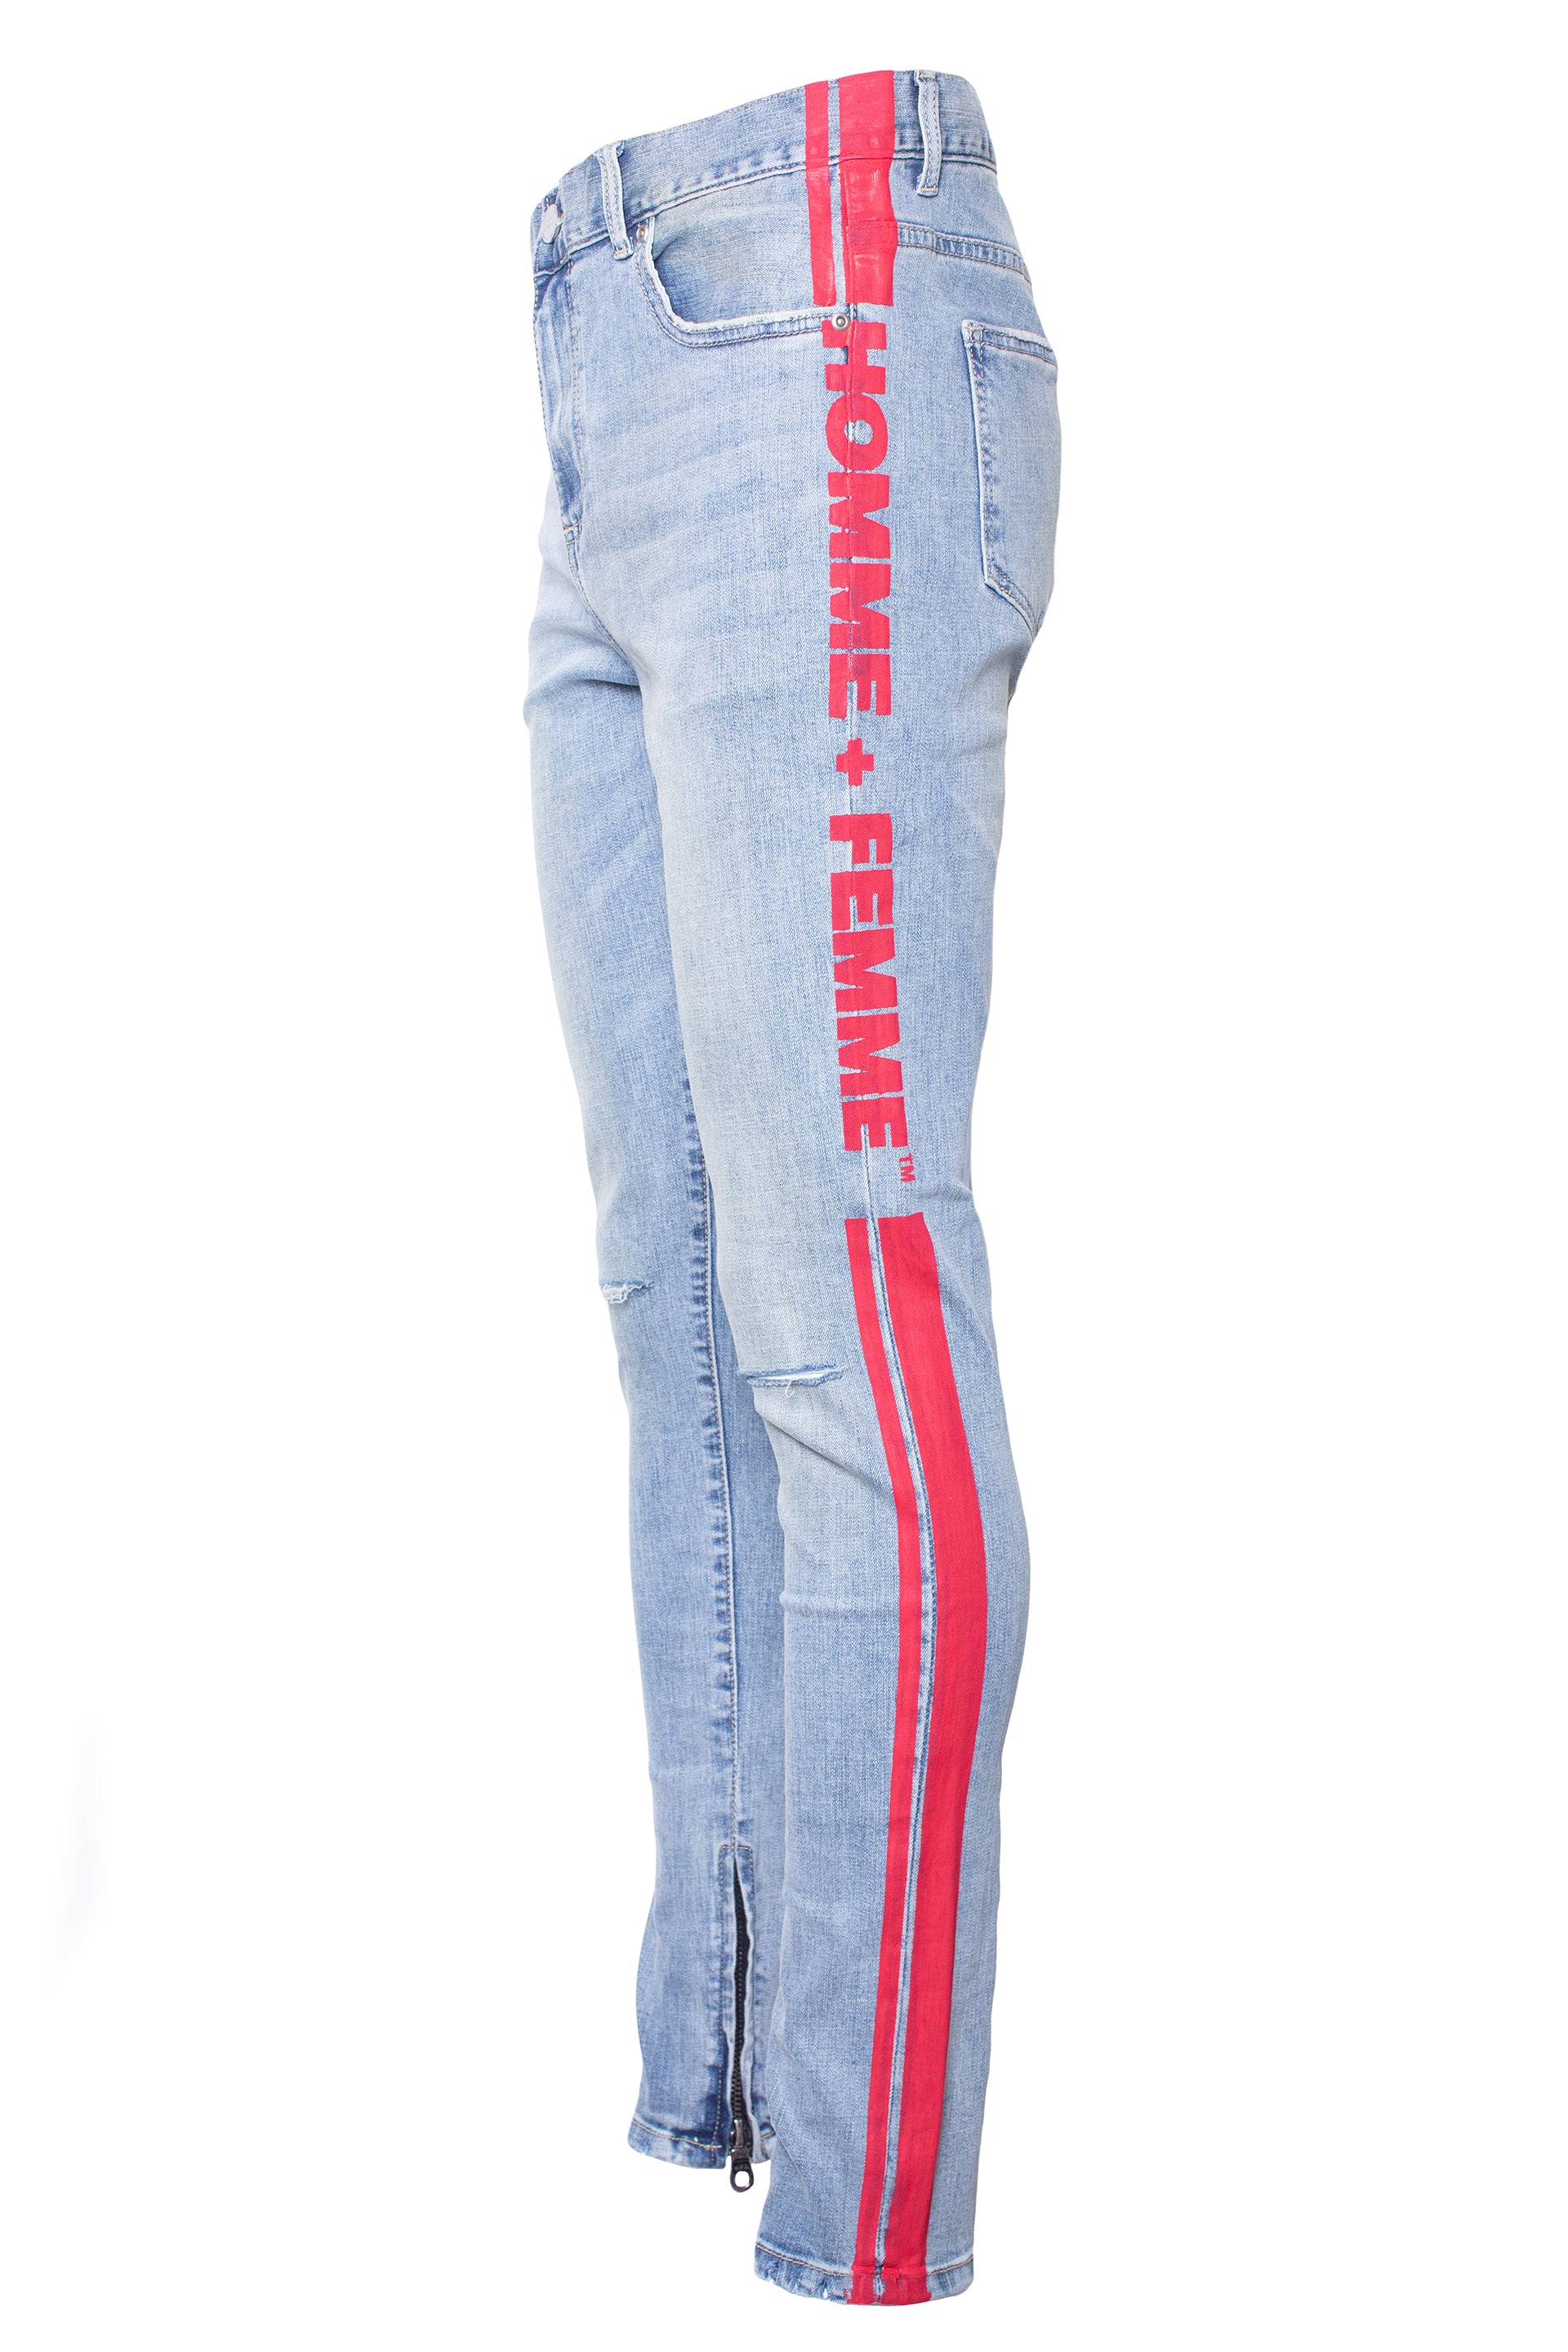 blue and red jeans